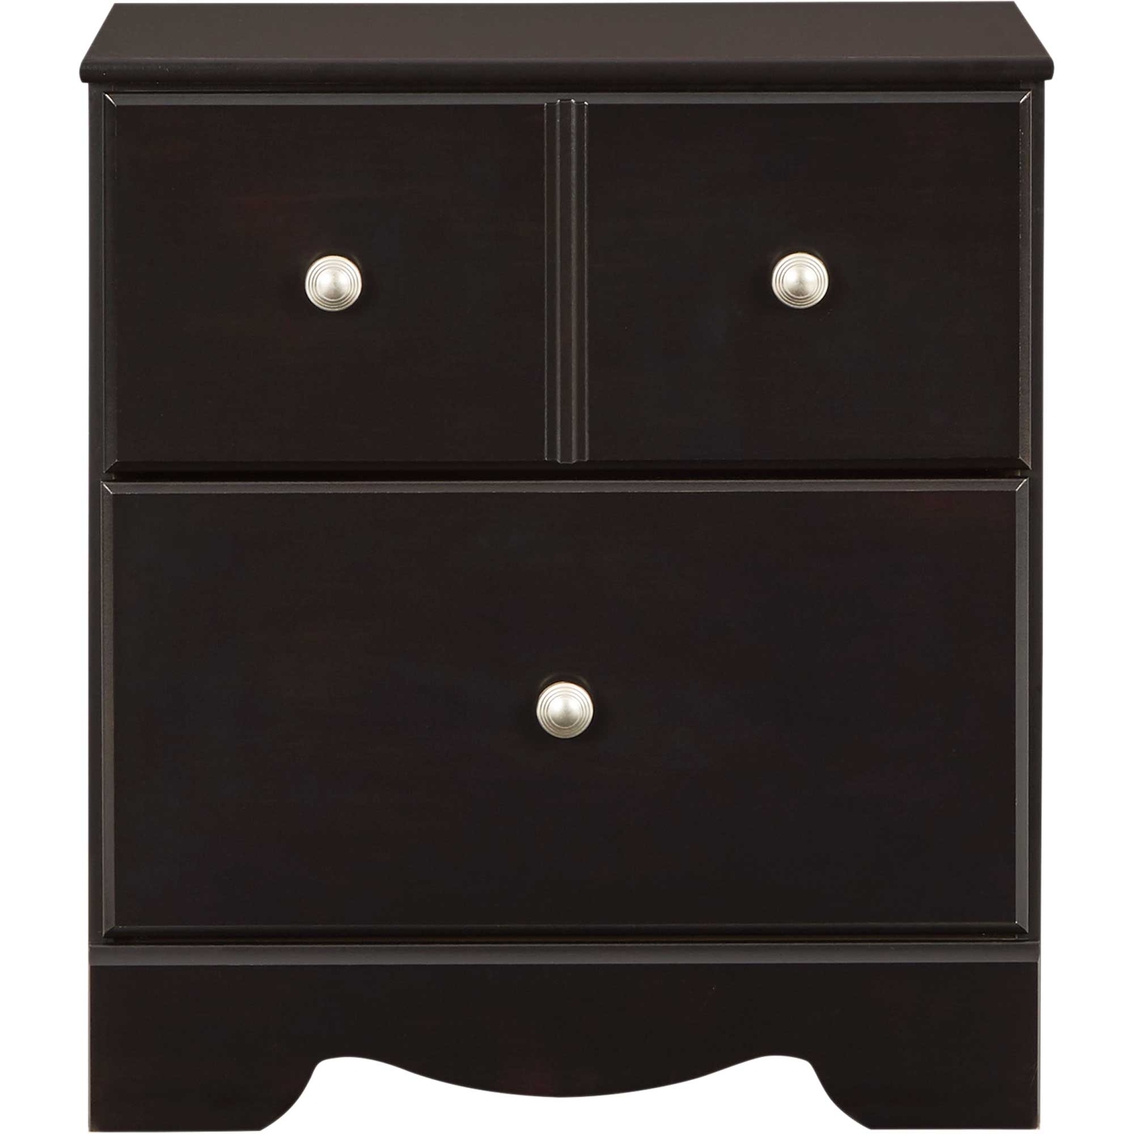 Signature Design by Ashley Mirlotown 2 Drawer Nightstand - Image 2 of 7